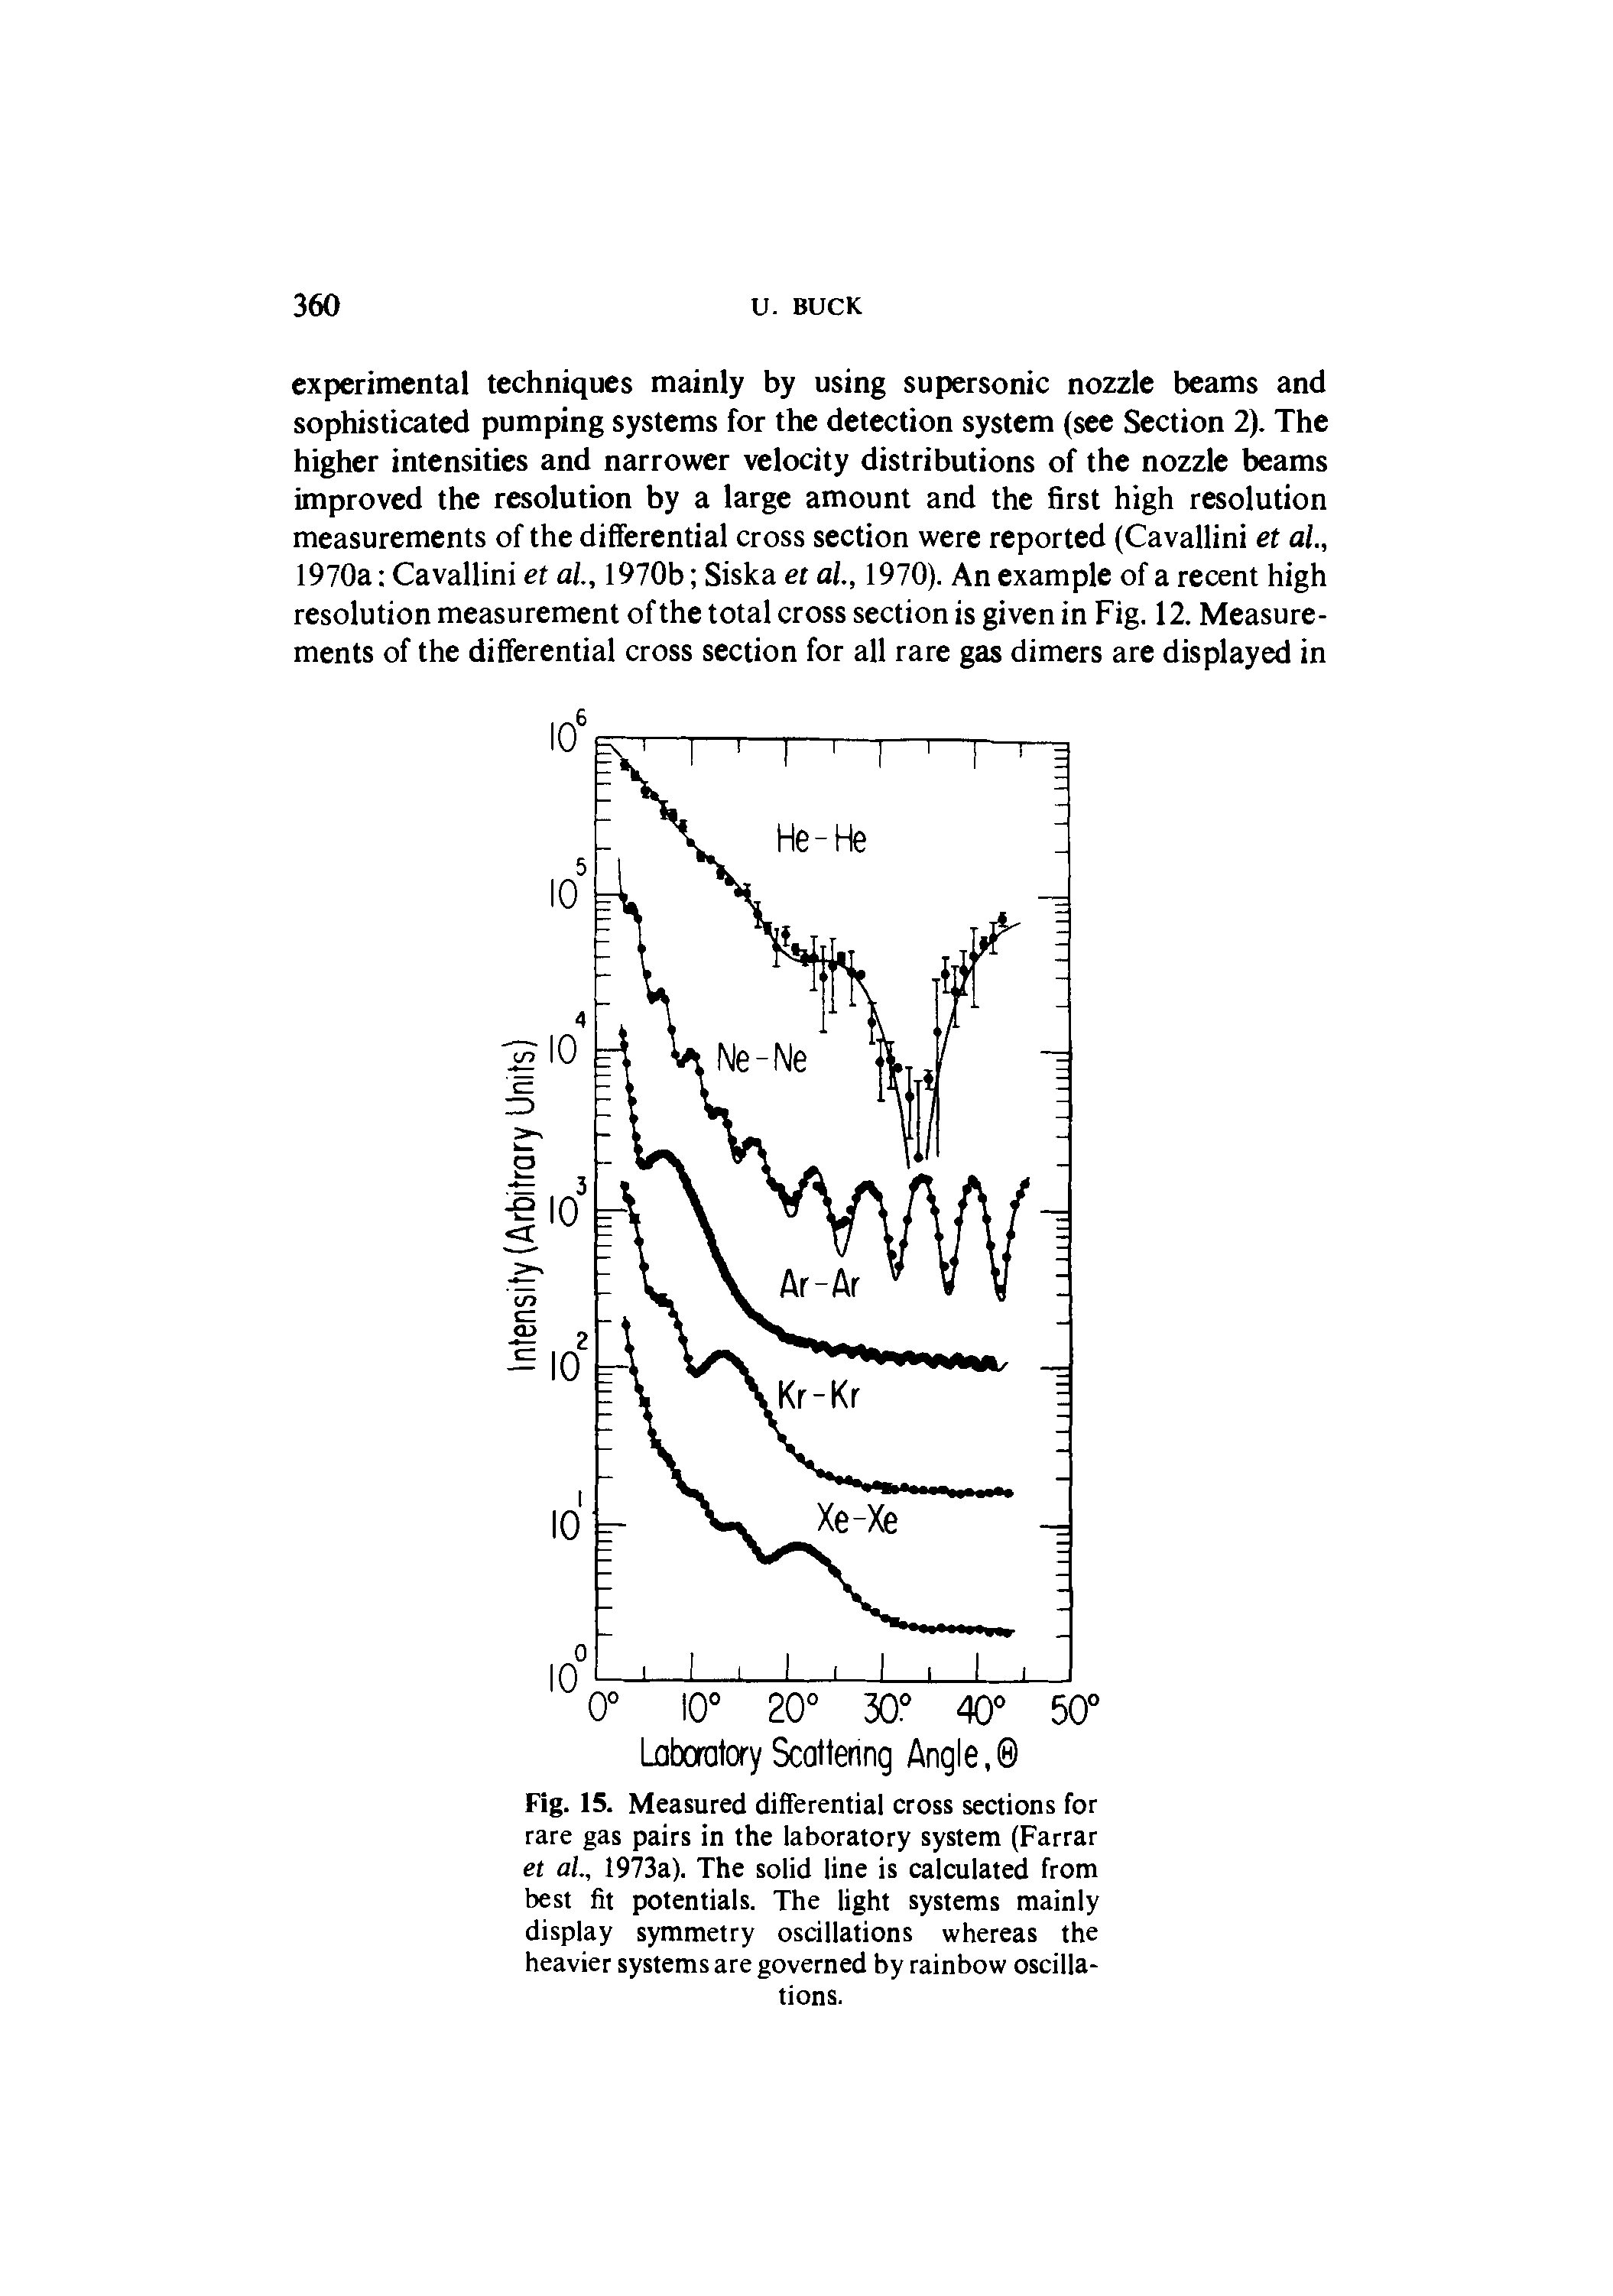 Fig. 15. Measured differential cross sections for rare gas pairs in the laboratory system (Farrar et al, 1973a). The solid line is calculated from best fit potentials. The light systems mainly display symmetry oscillations whereas the heavier systems are governed by rainbow oscillations.